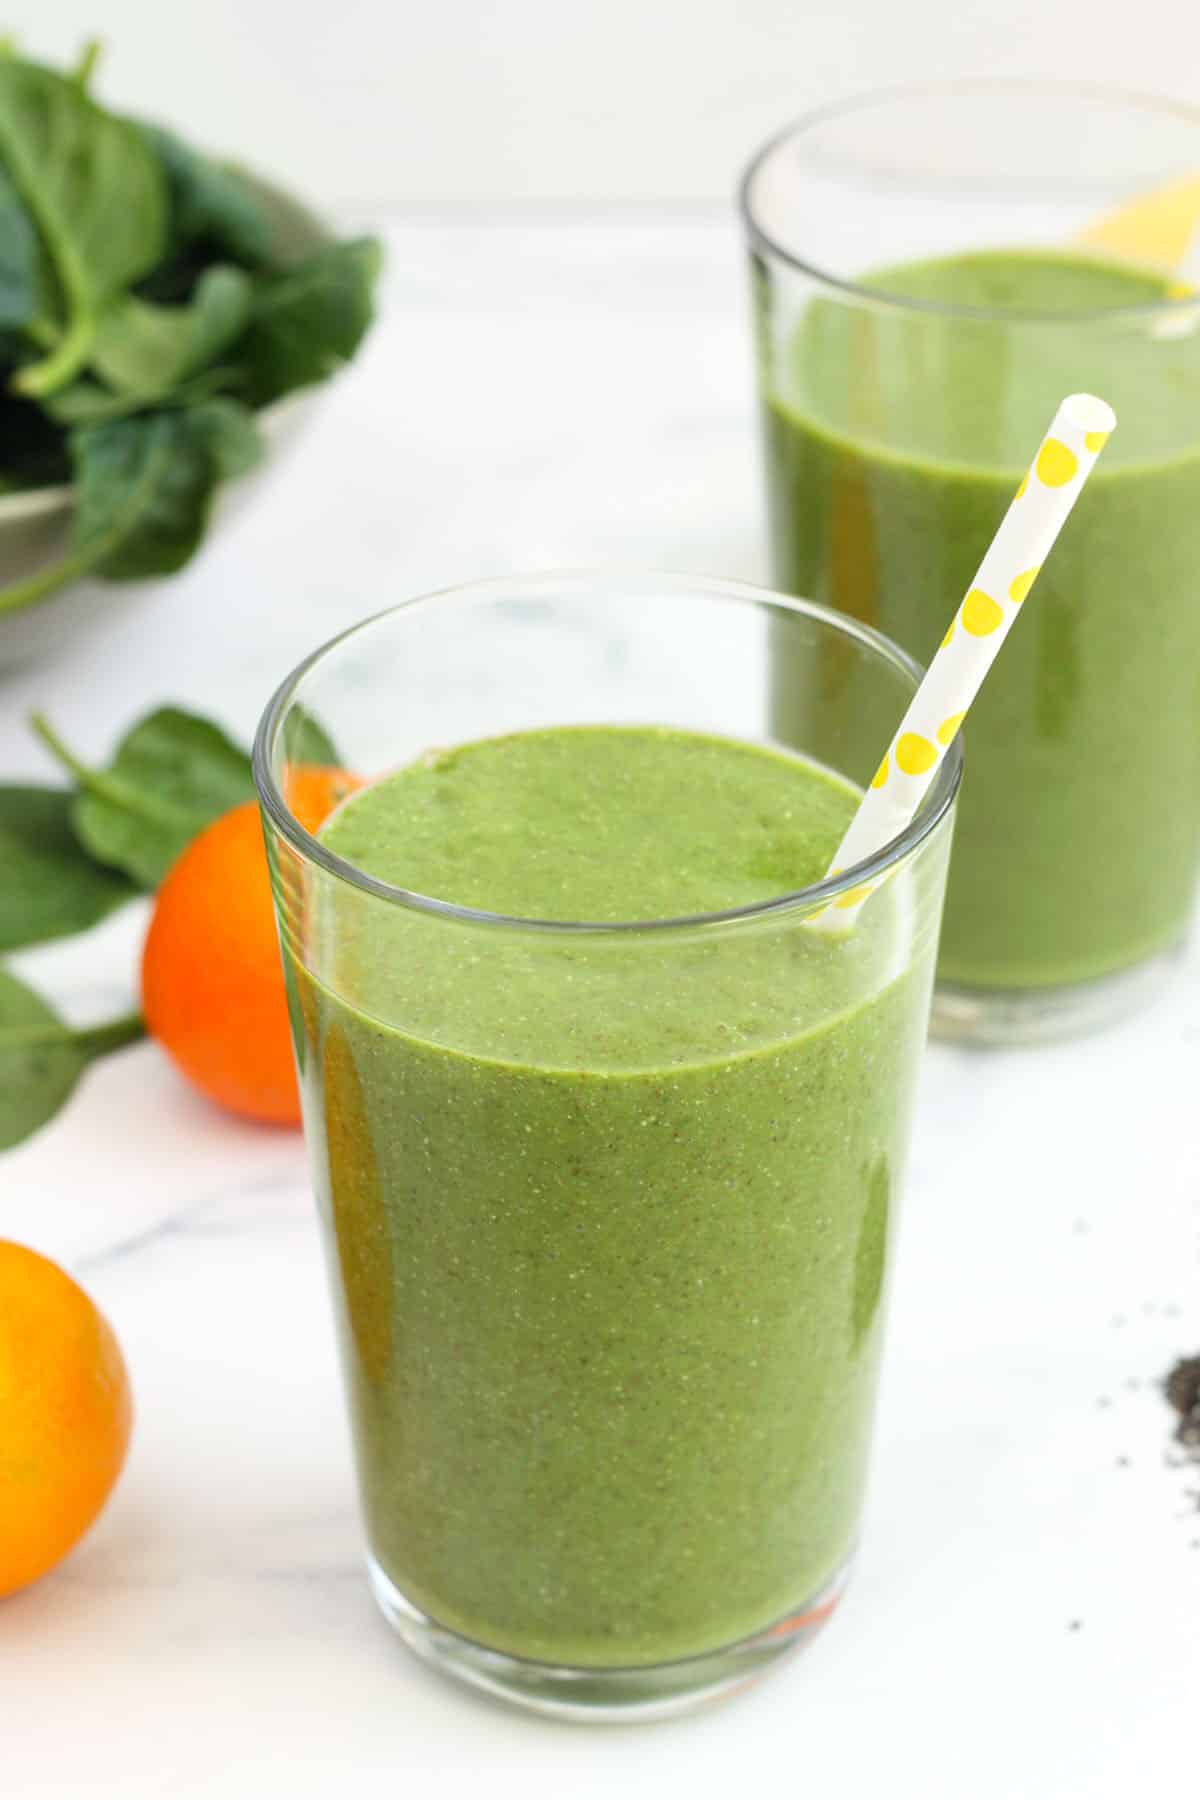 green smoothie in a clear glass with a yellow polka dot straw